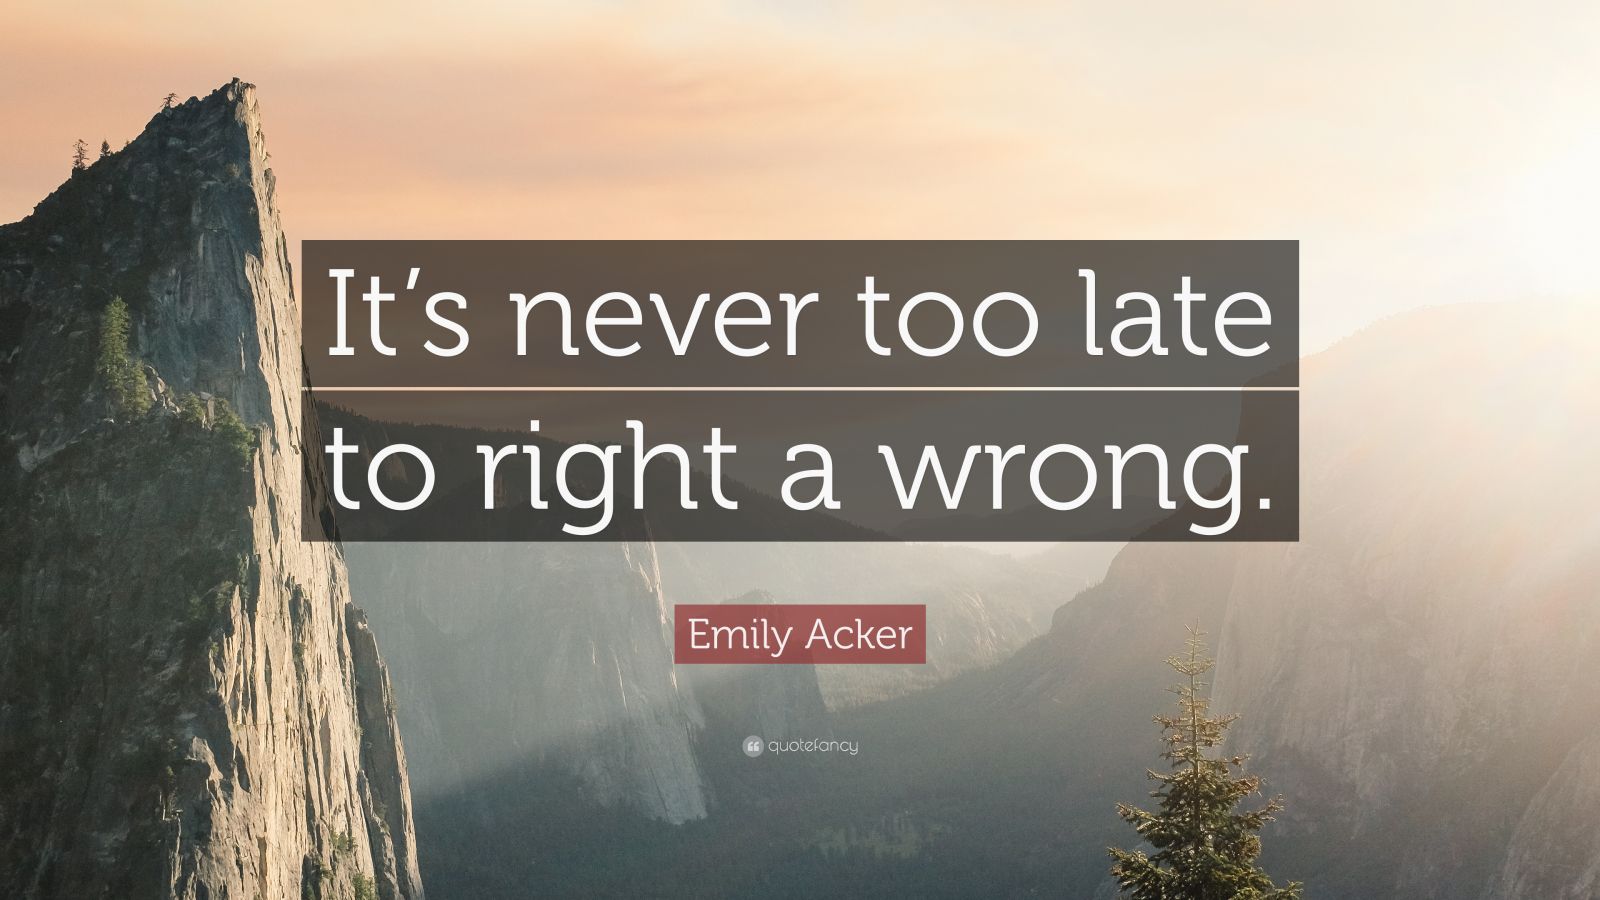 Emily Acker Quote: “It's never too late to right a wrong.”